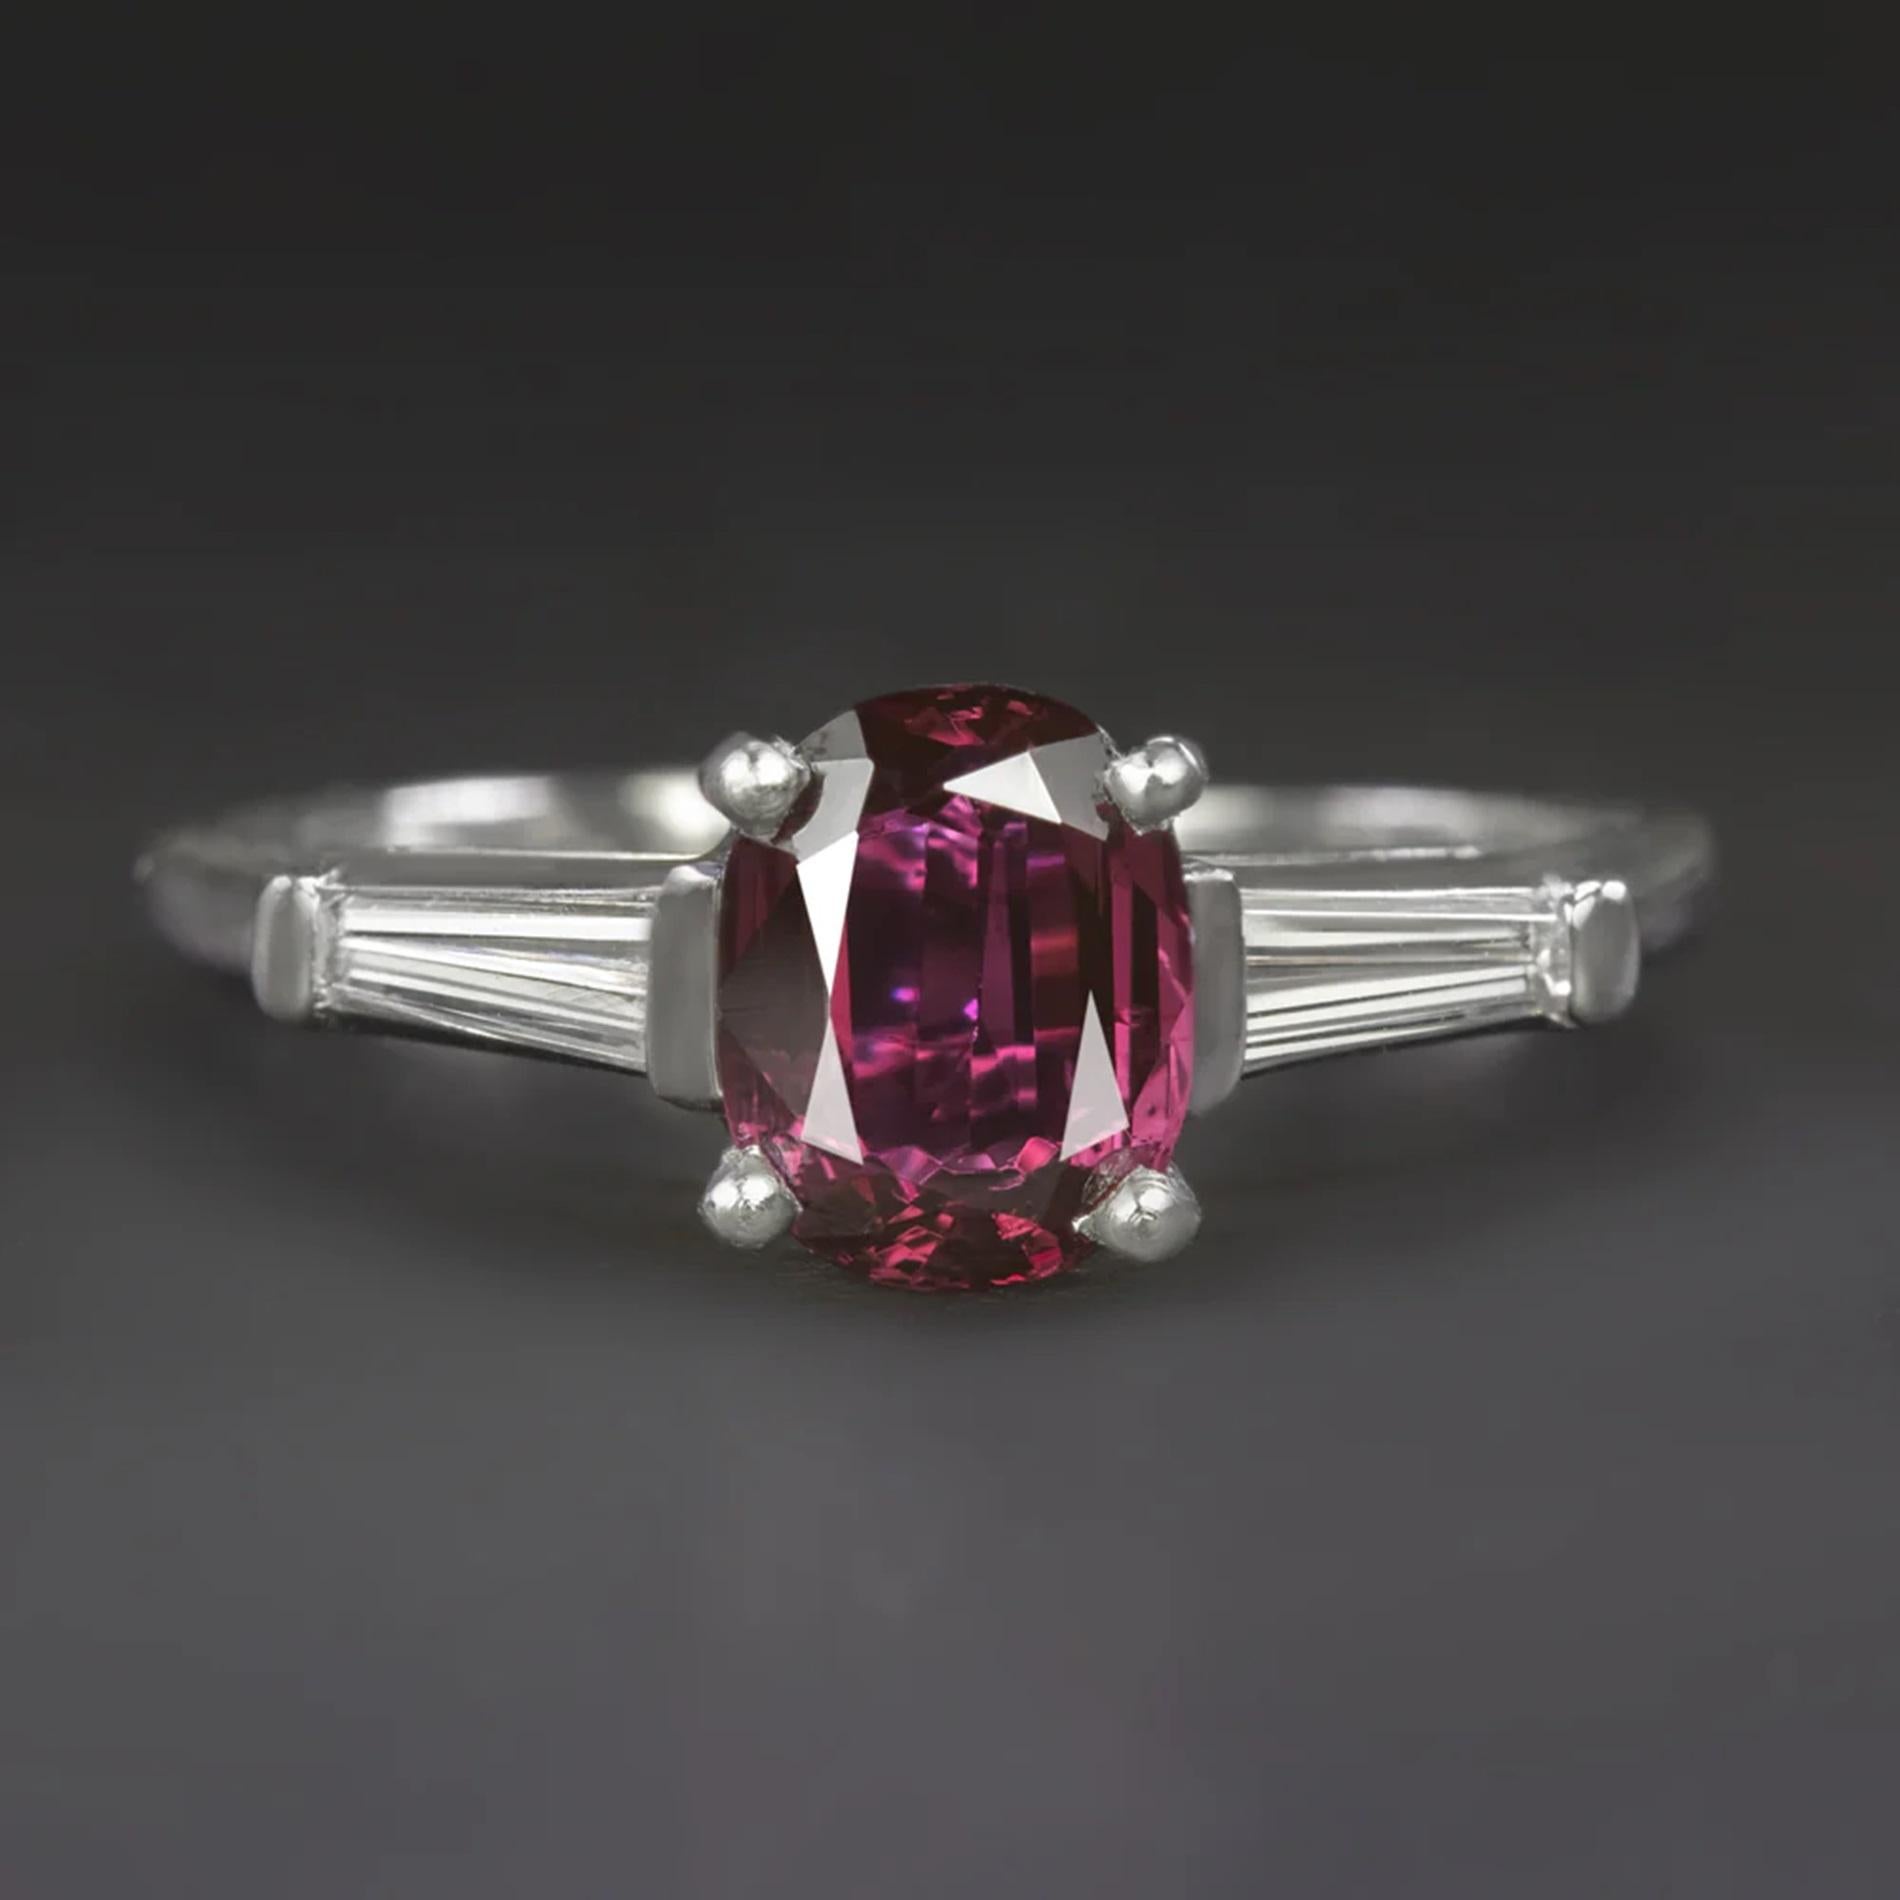 Indulge in the allure of this exquisite ring, featuring a mesmerizing 1.82 ct natural sapphire center with a rich and captivating red hue. This striking gemstone is a true statement of elegance and sophistication.

Key Highlights:

The center